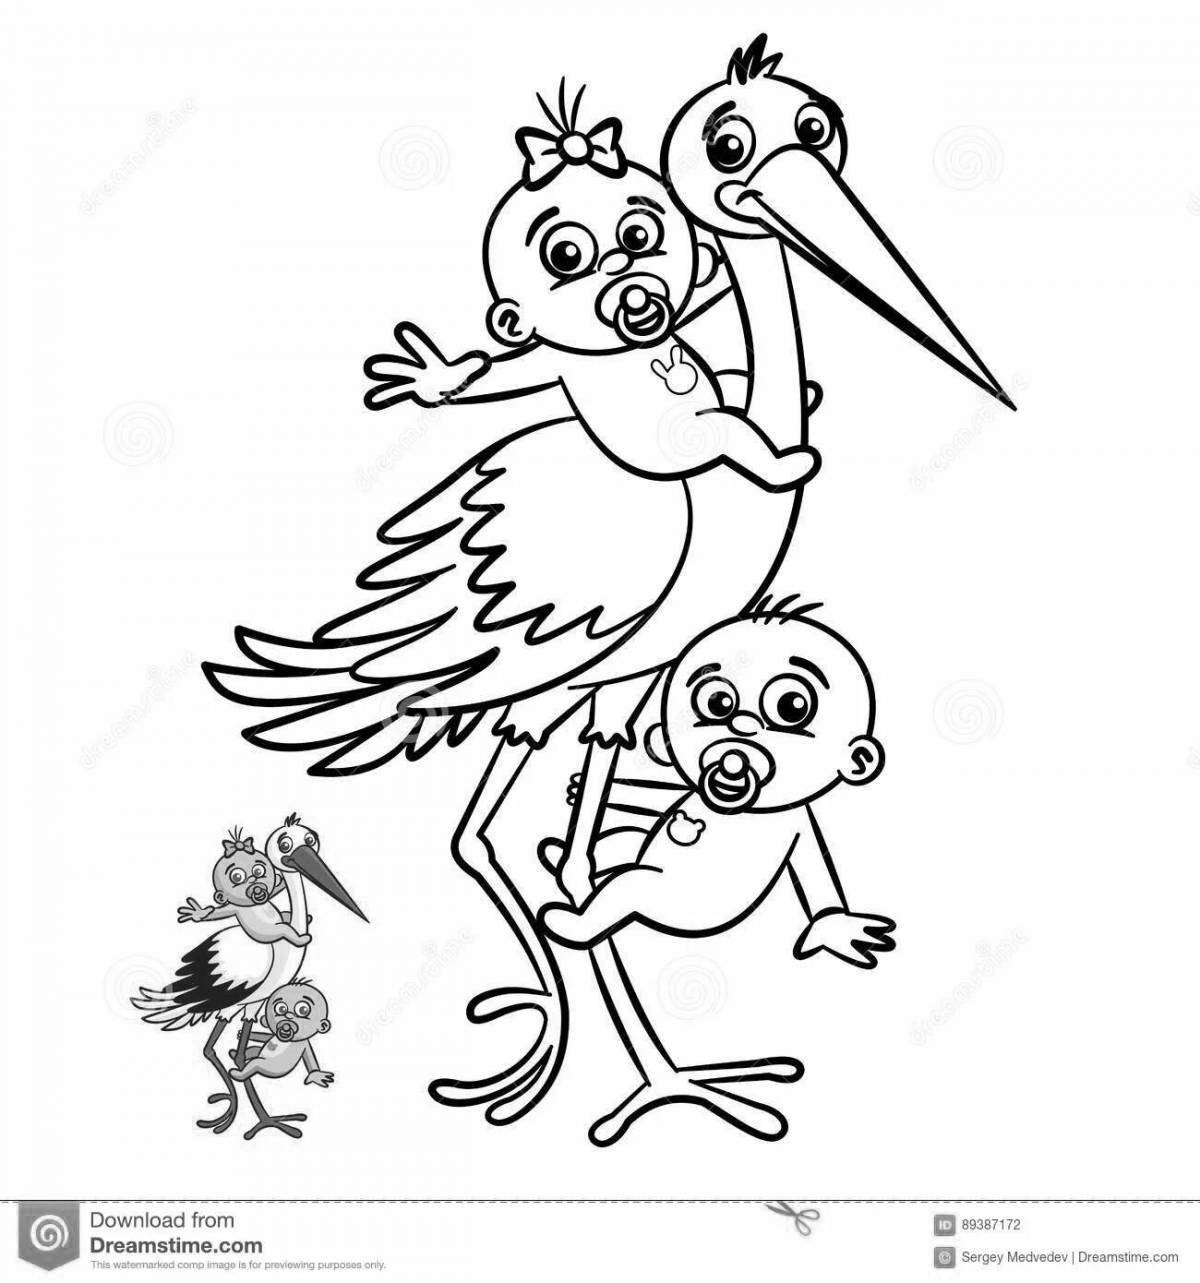 Coloring book glowing stork with baby